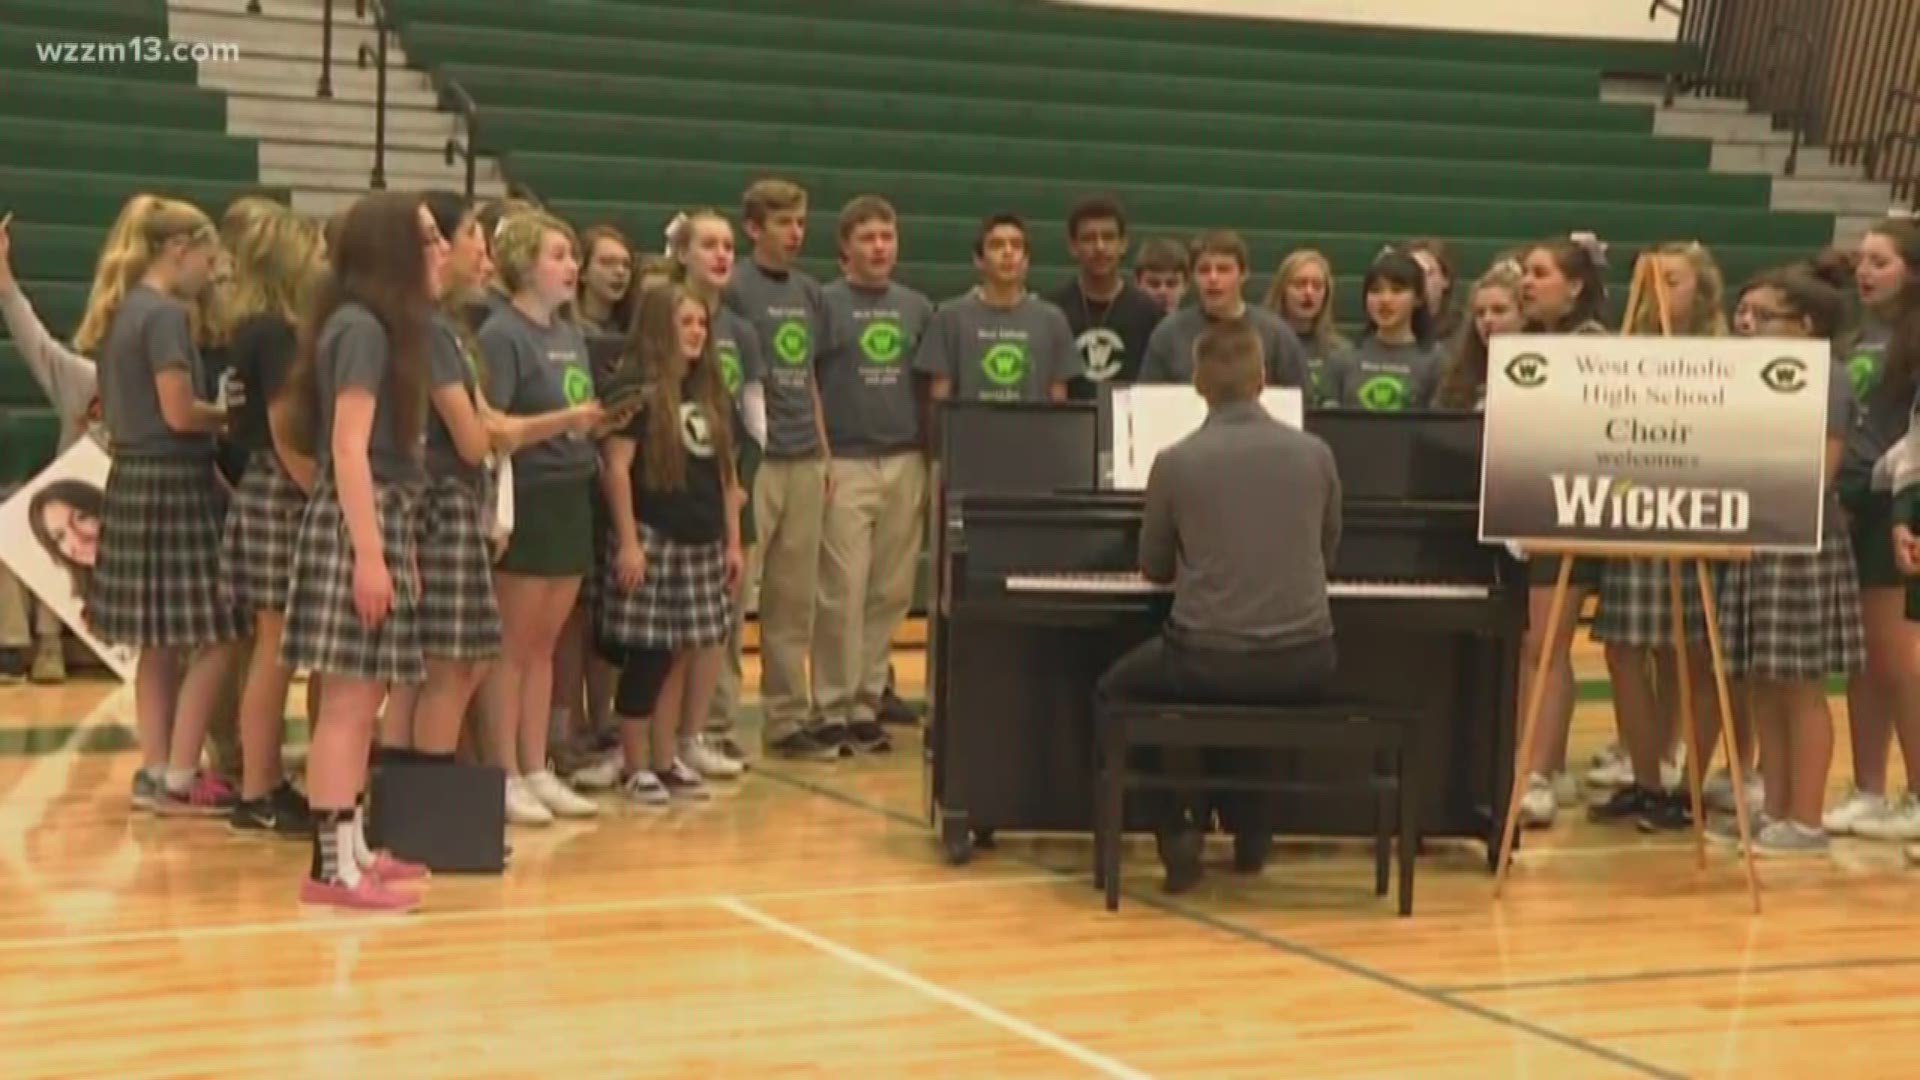 West Catholic High School choir to open for Wicked in Grand Rapids